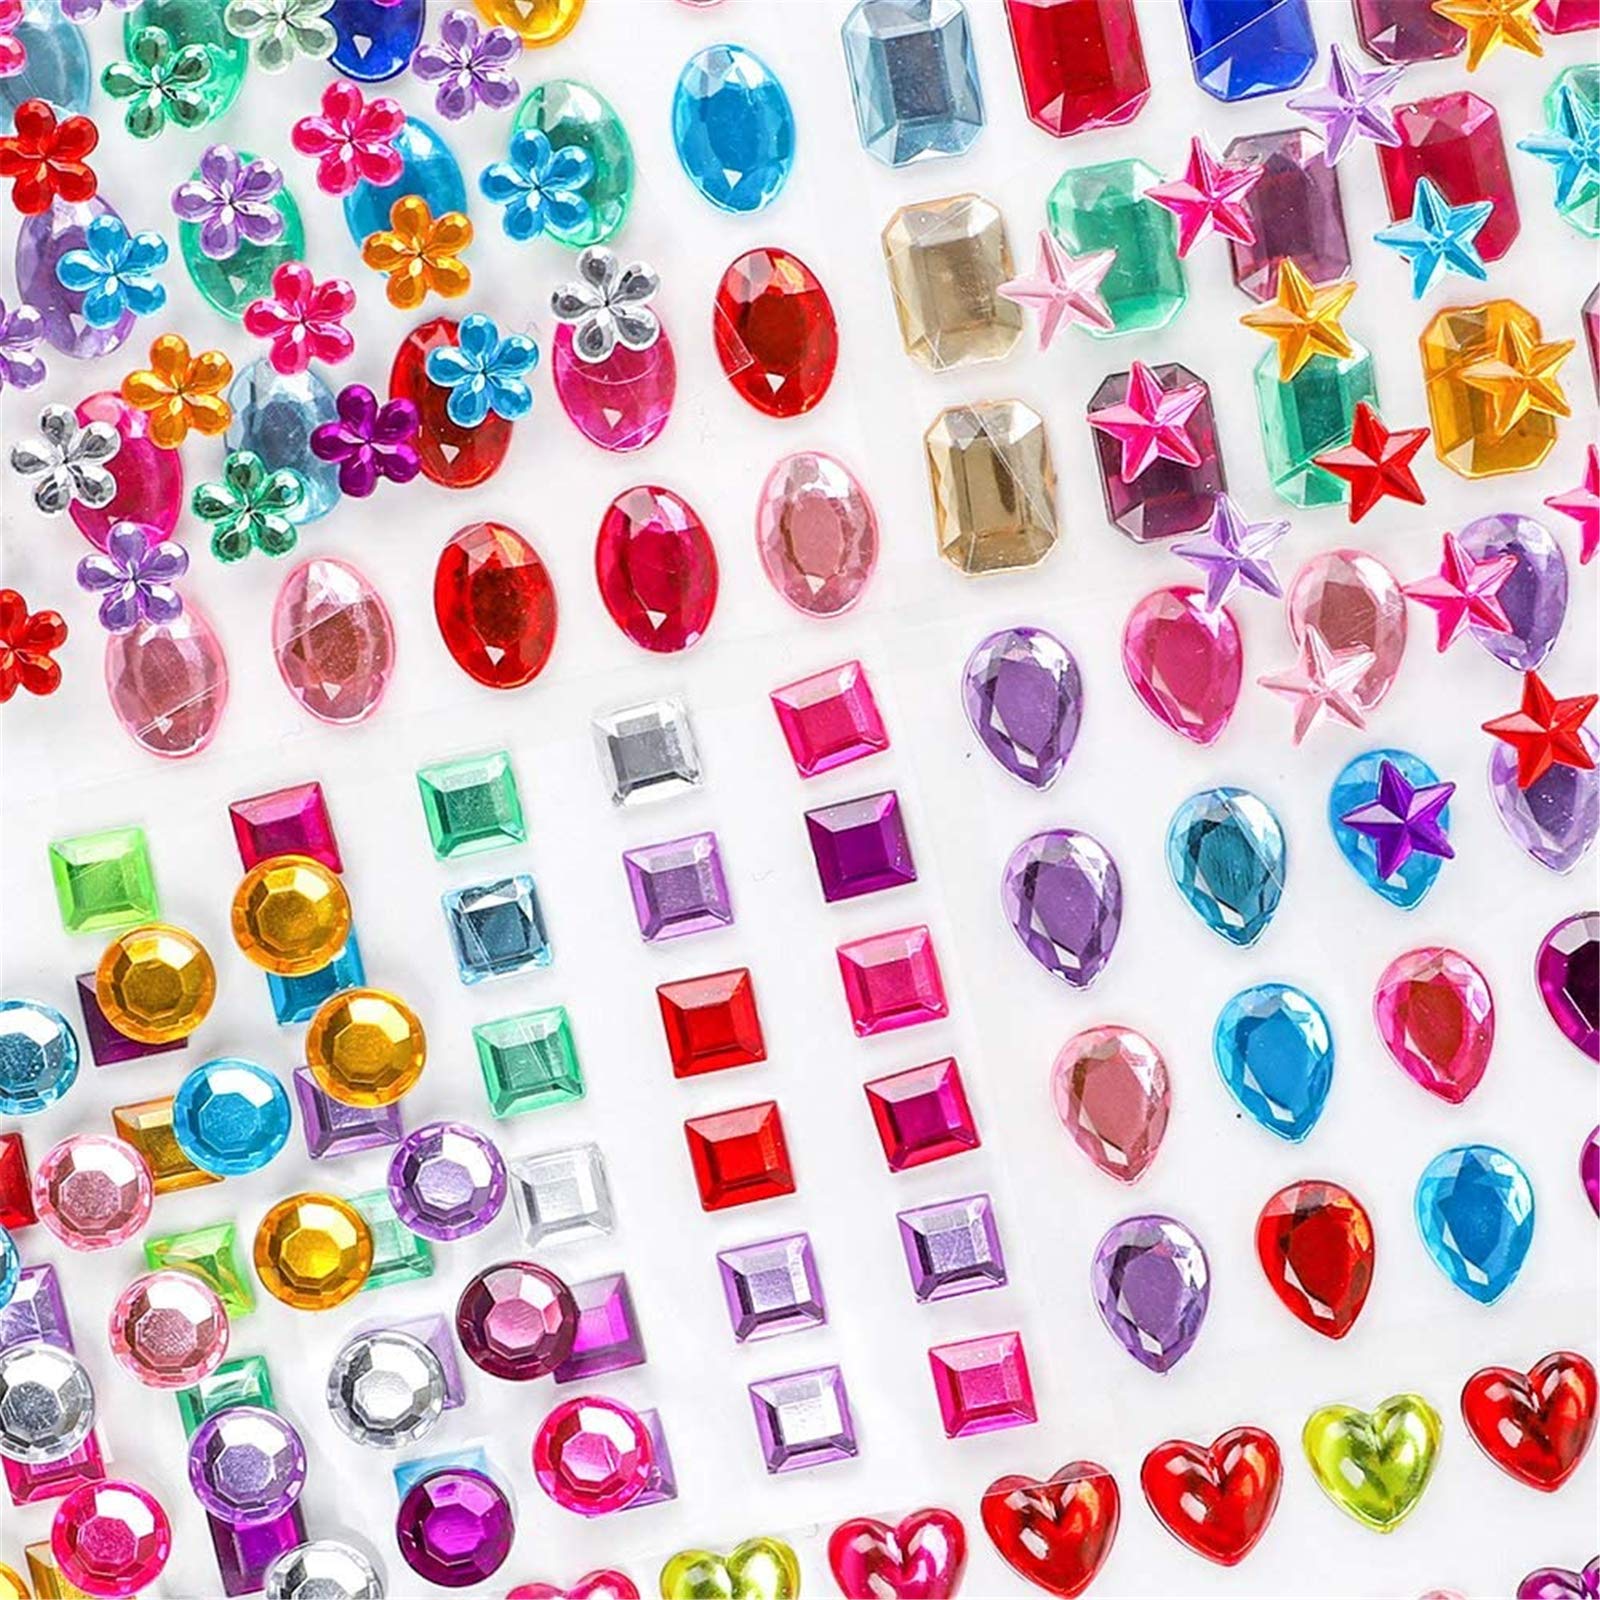 Gems for Crafts - 529 Pcs Self Adhesive Rhinestone Stickers with